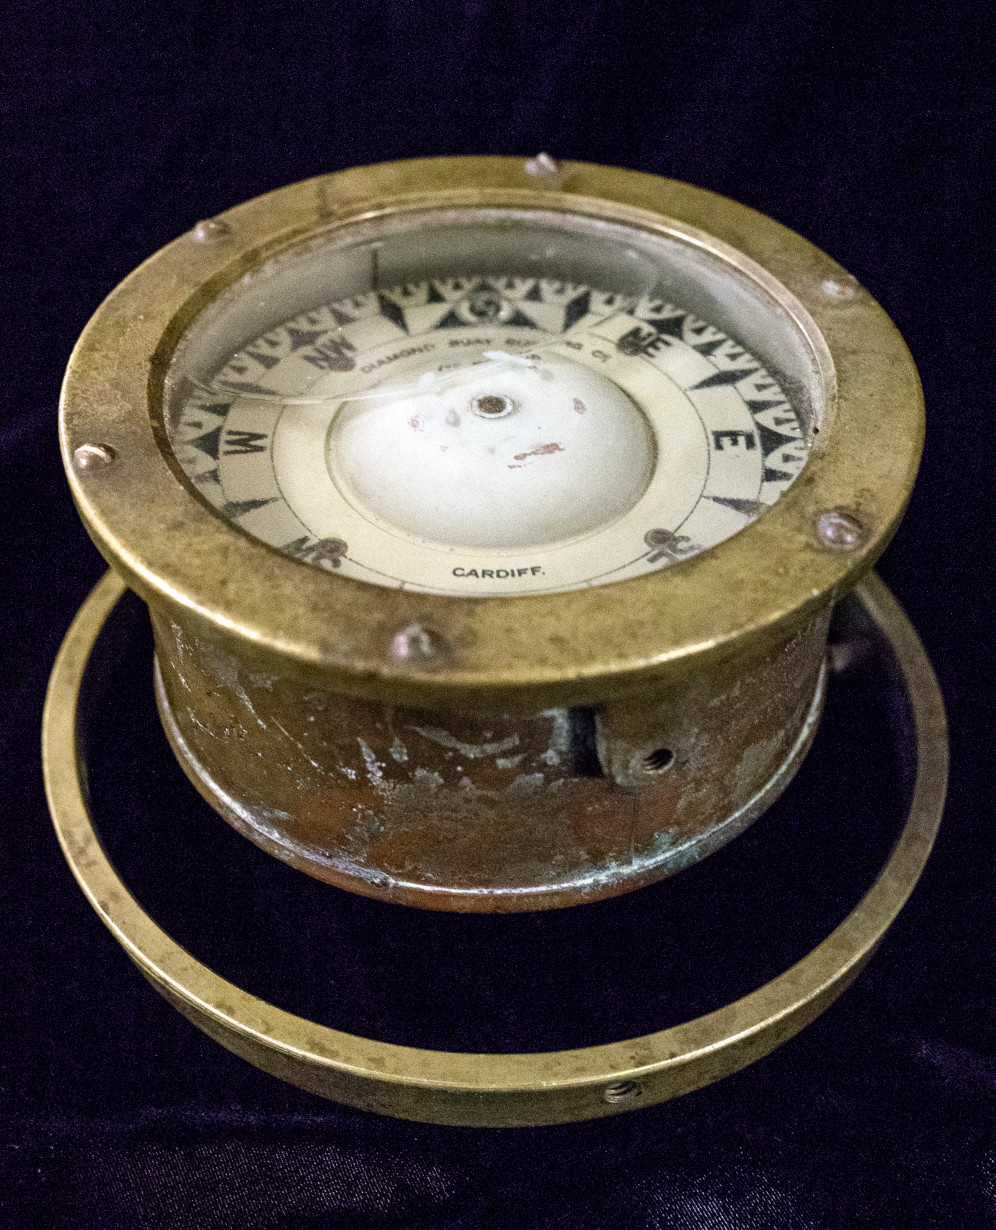 brass navigational compass recovered from shipwreck